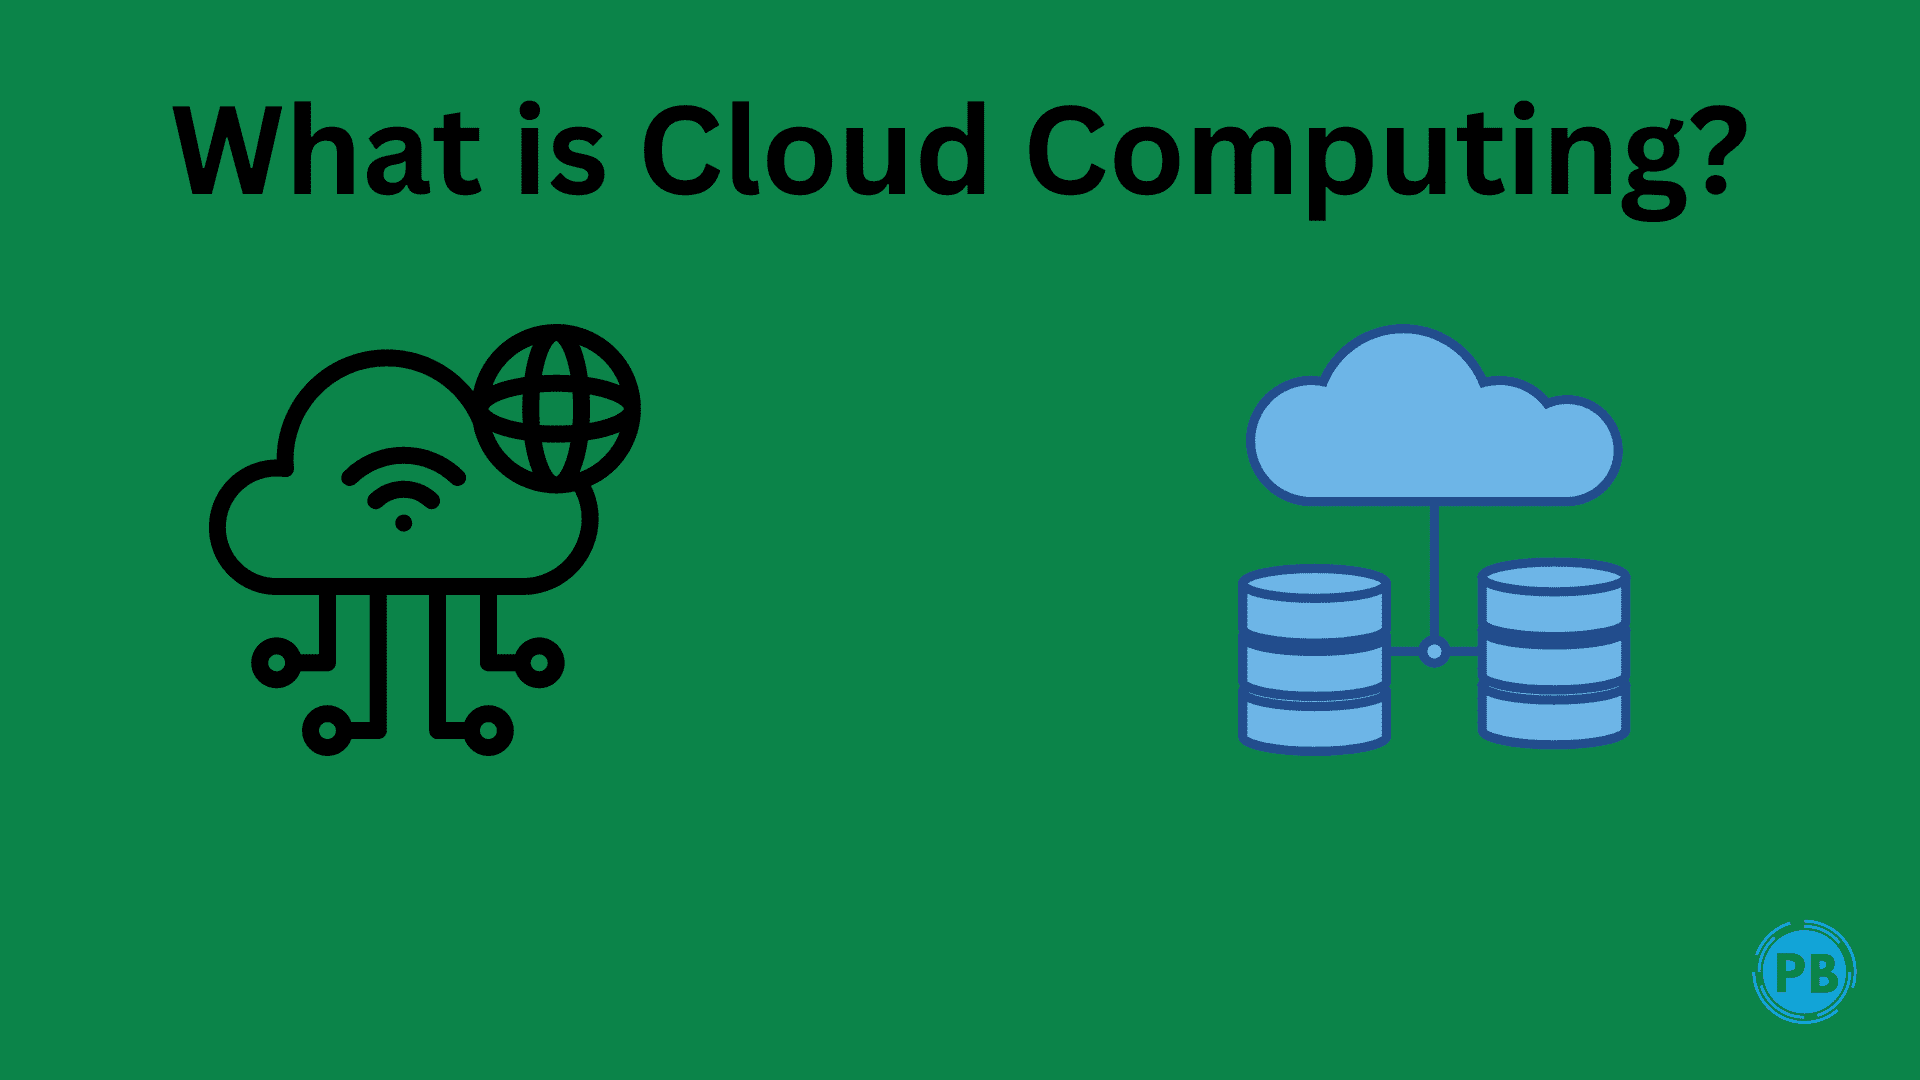 what is Cloud Computing?